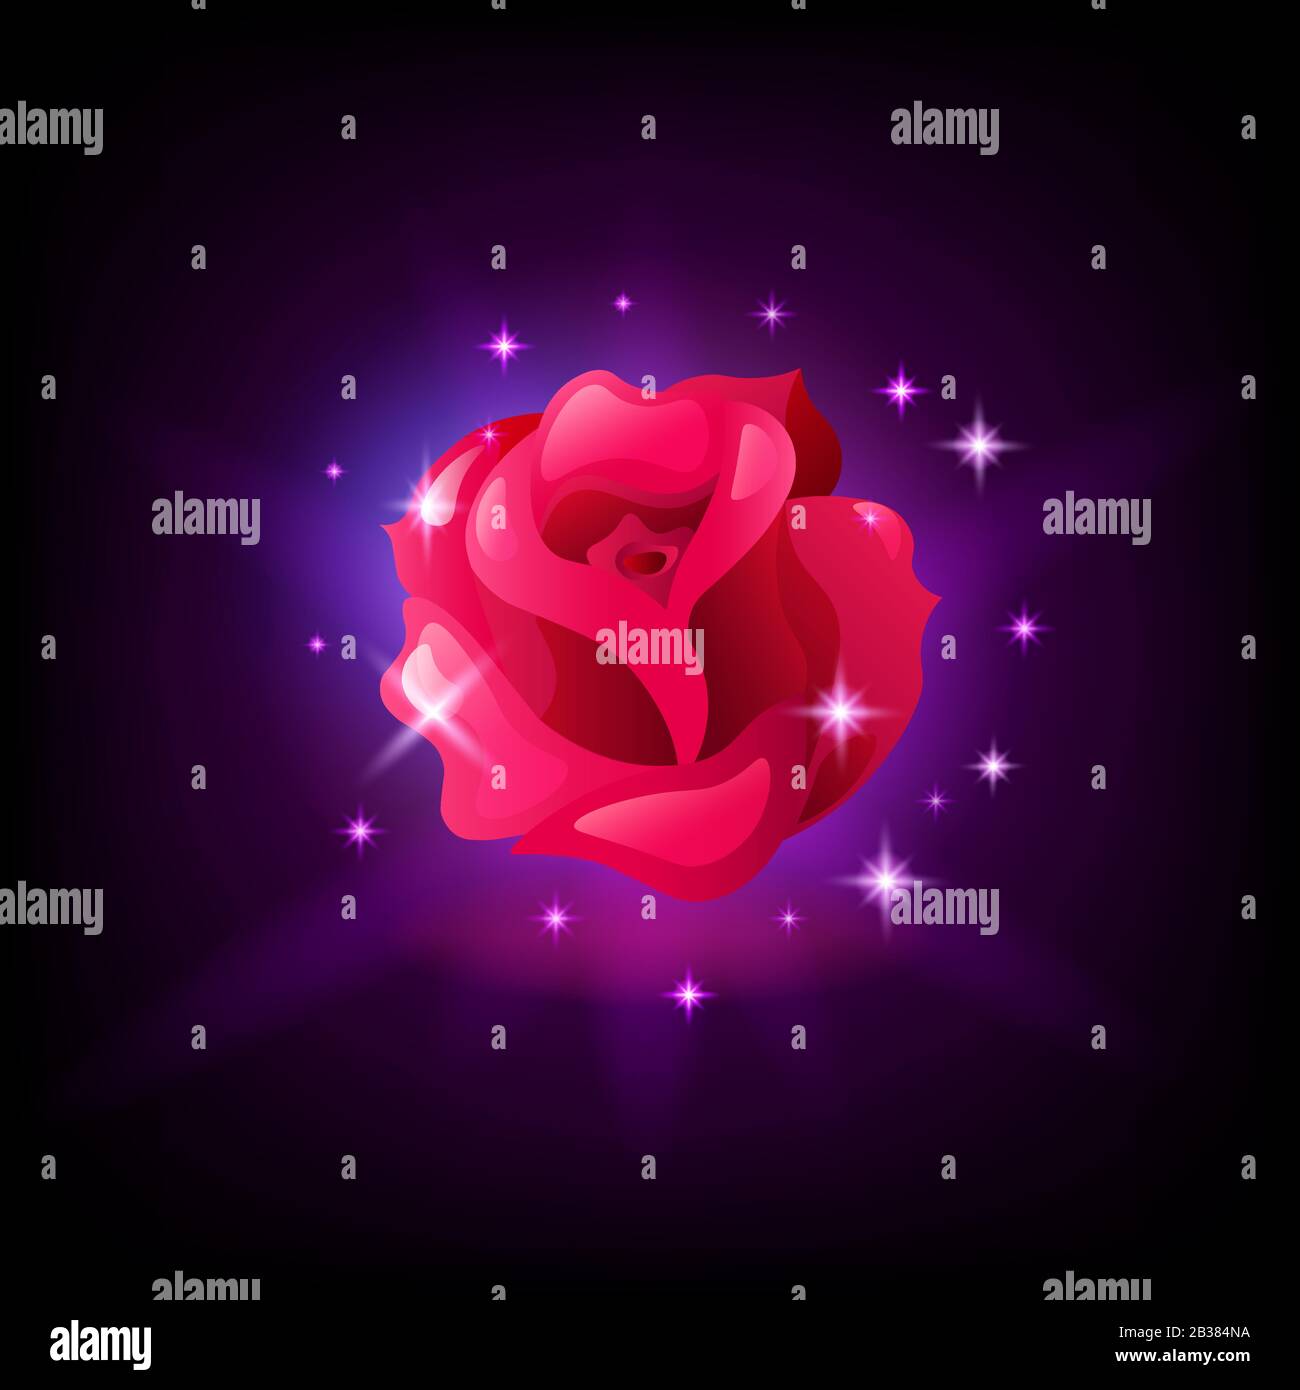 Red rose flower slot machine icon with sparkles on dark background, gambling game design, vector illustration. Stock Vector